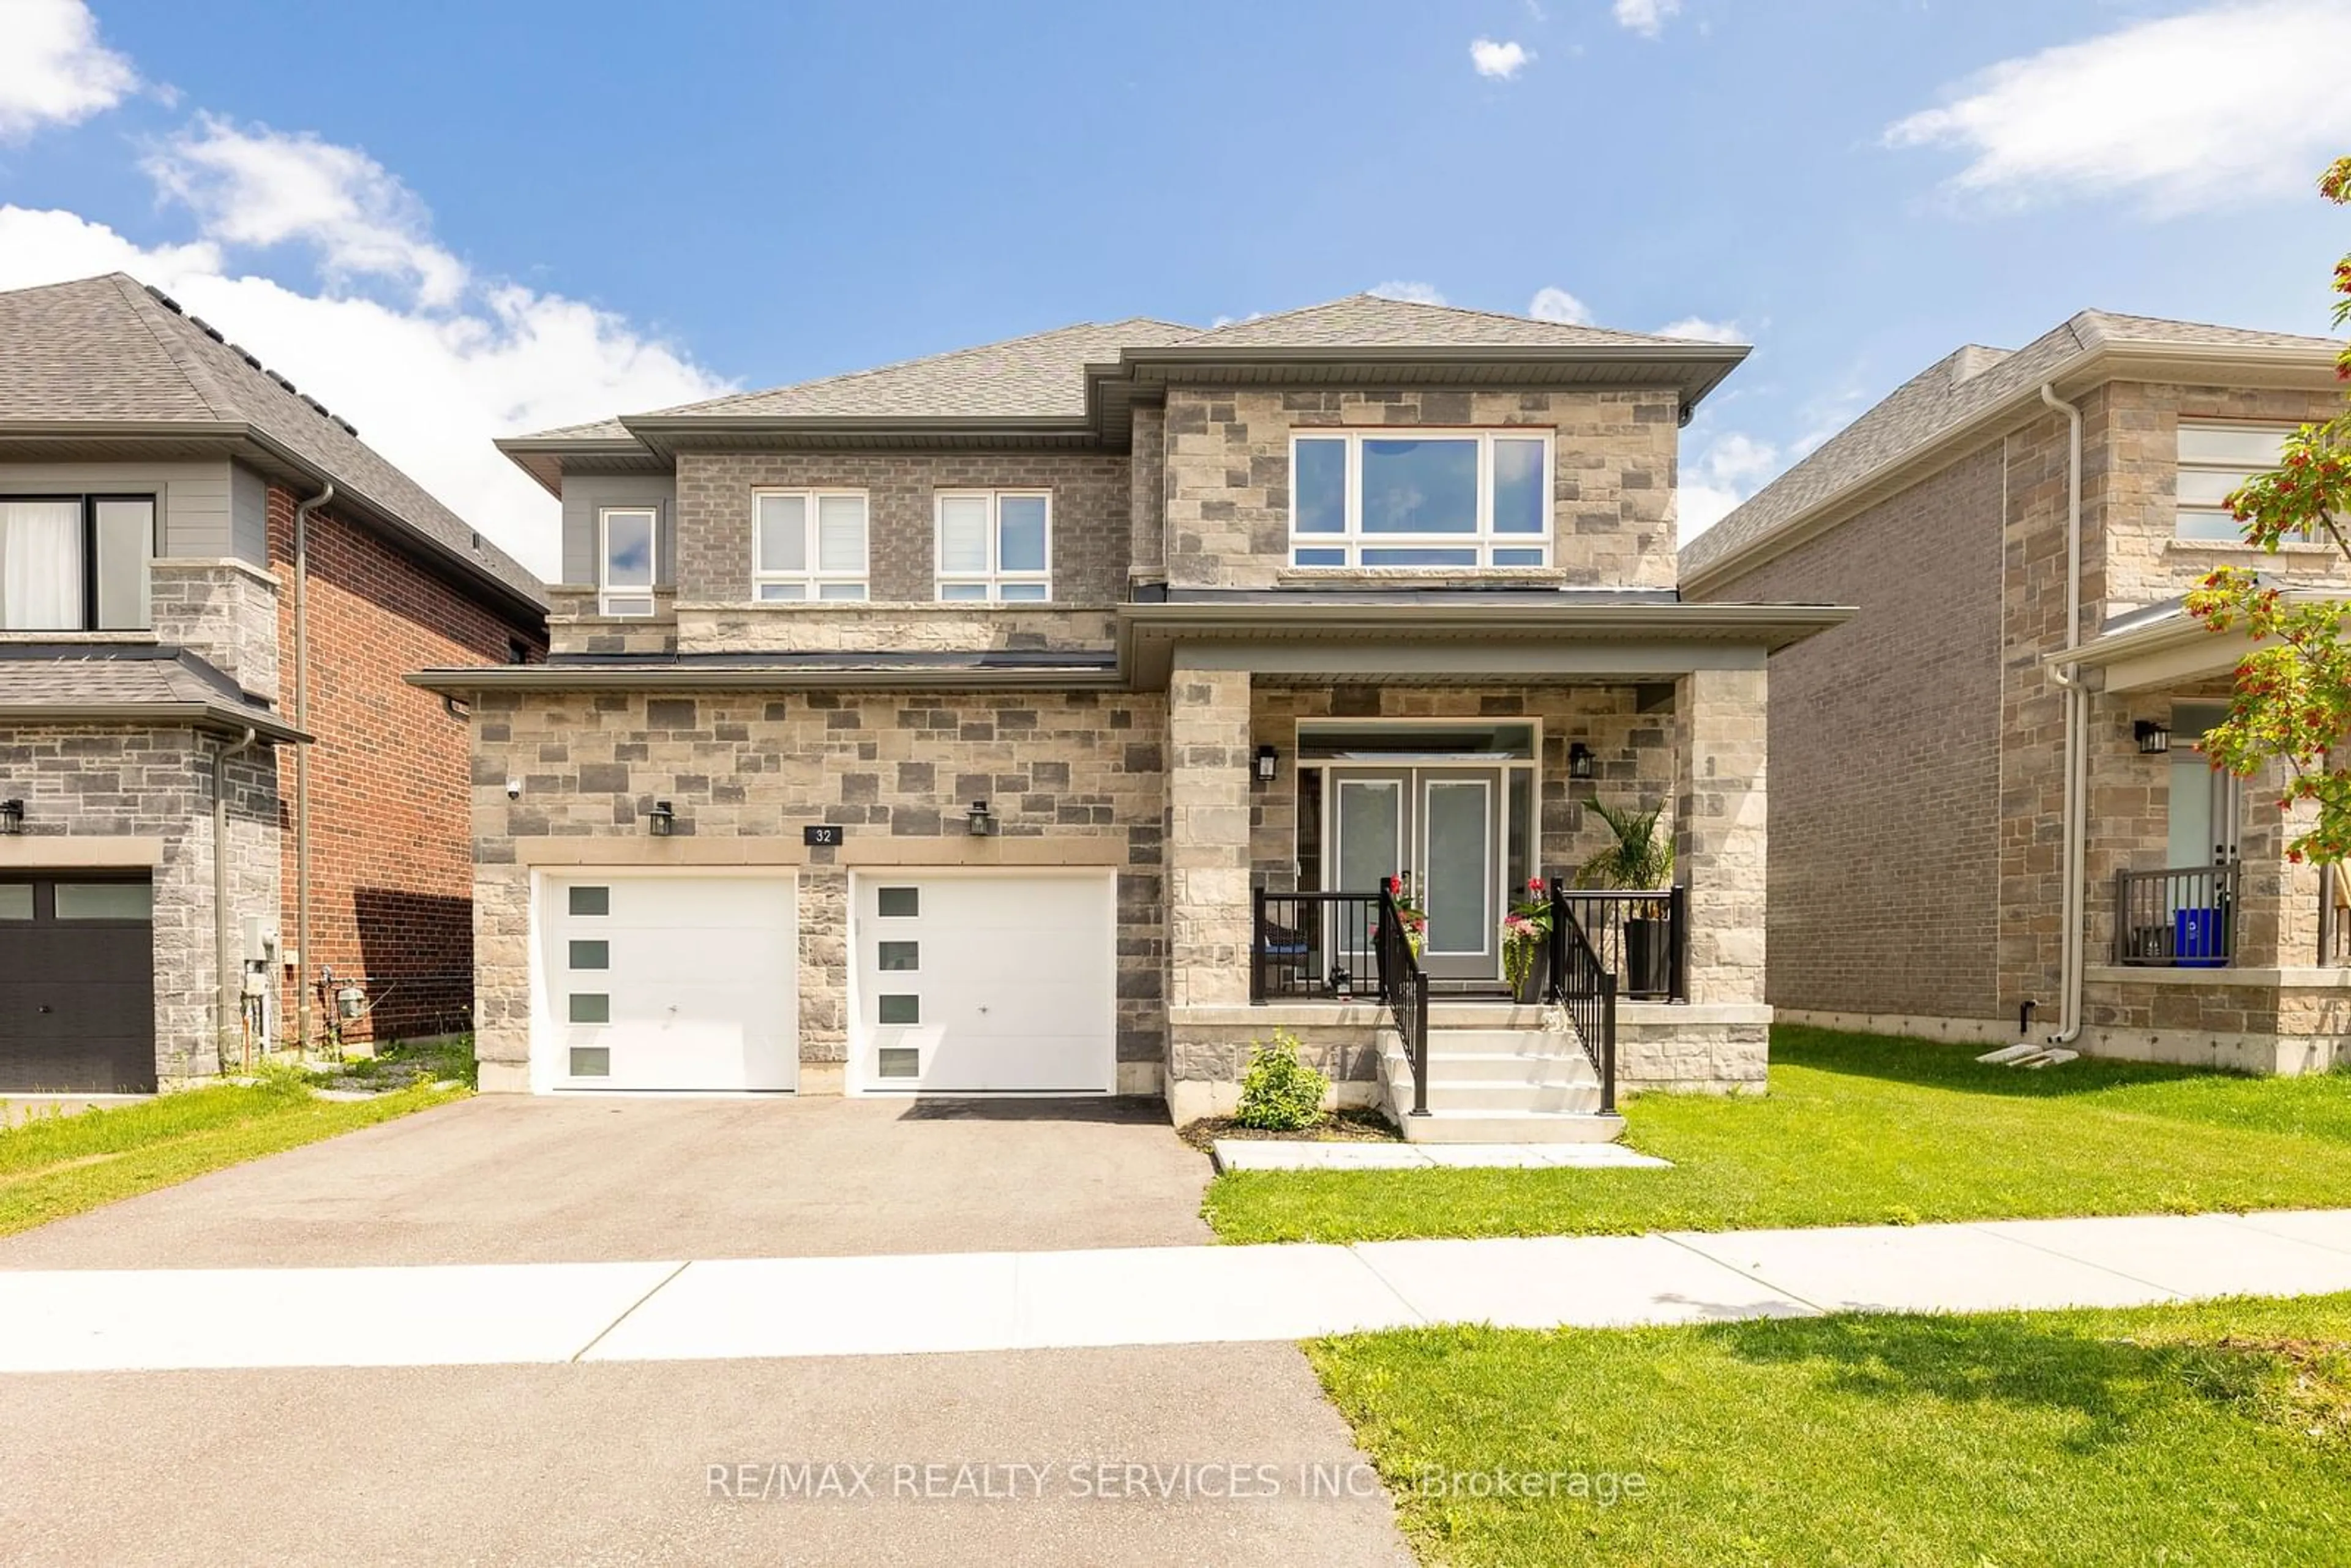 Home with brick exterior material for 32 Paddington Grve, Barrie Ontario L9J 0B1